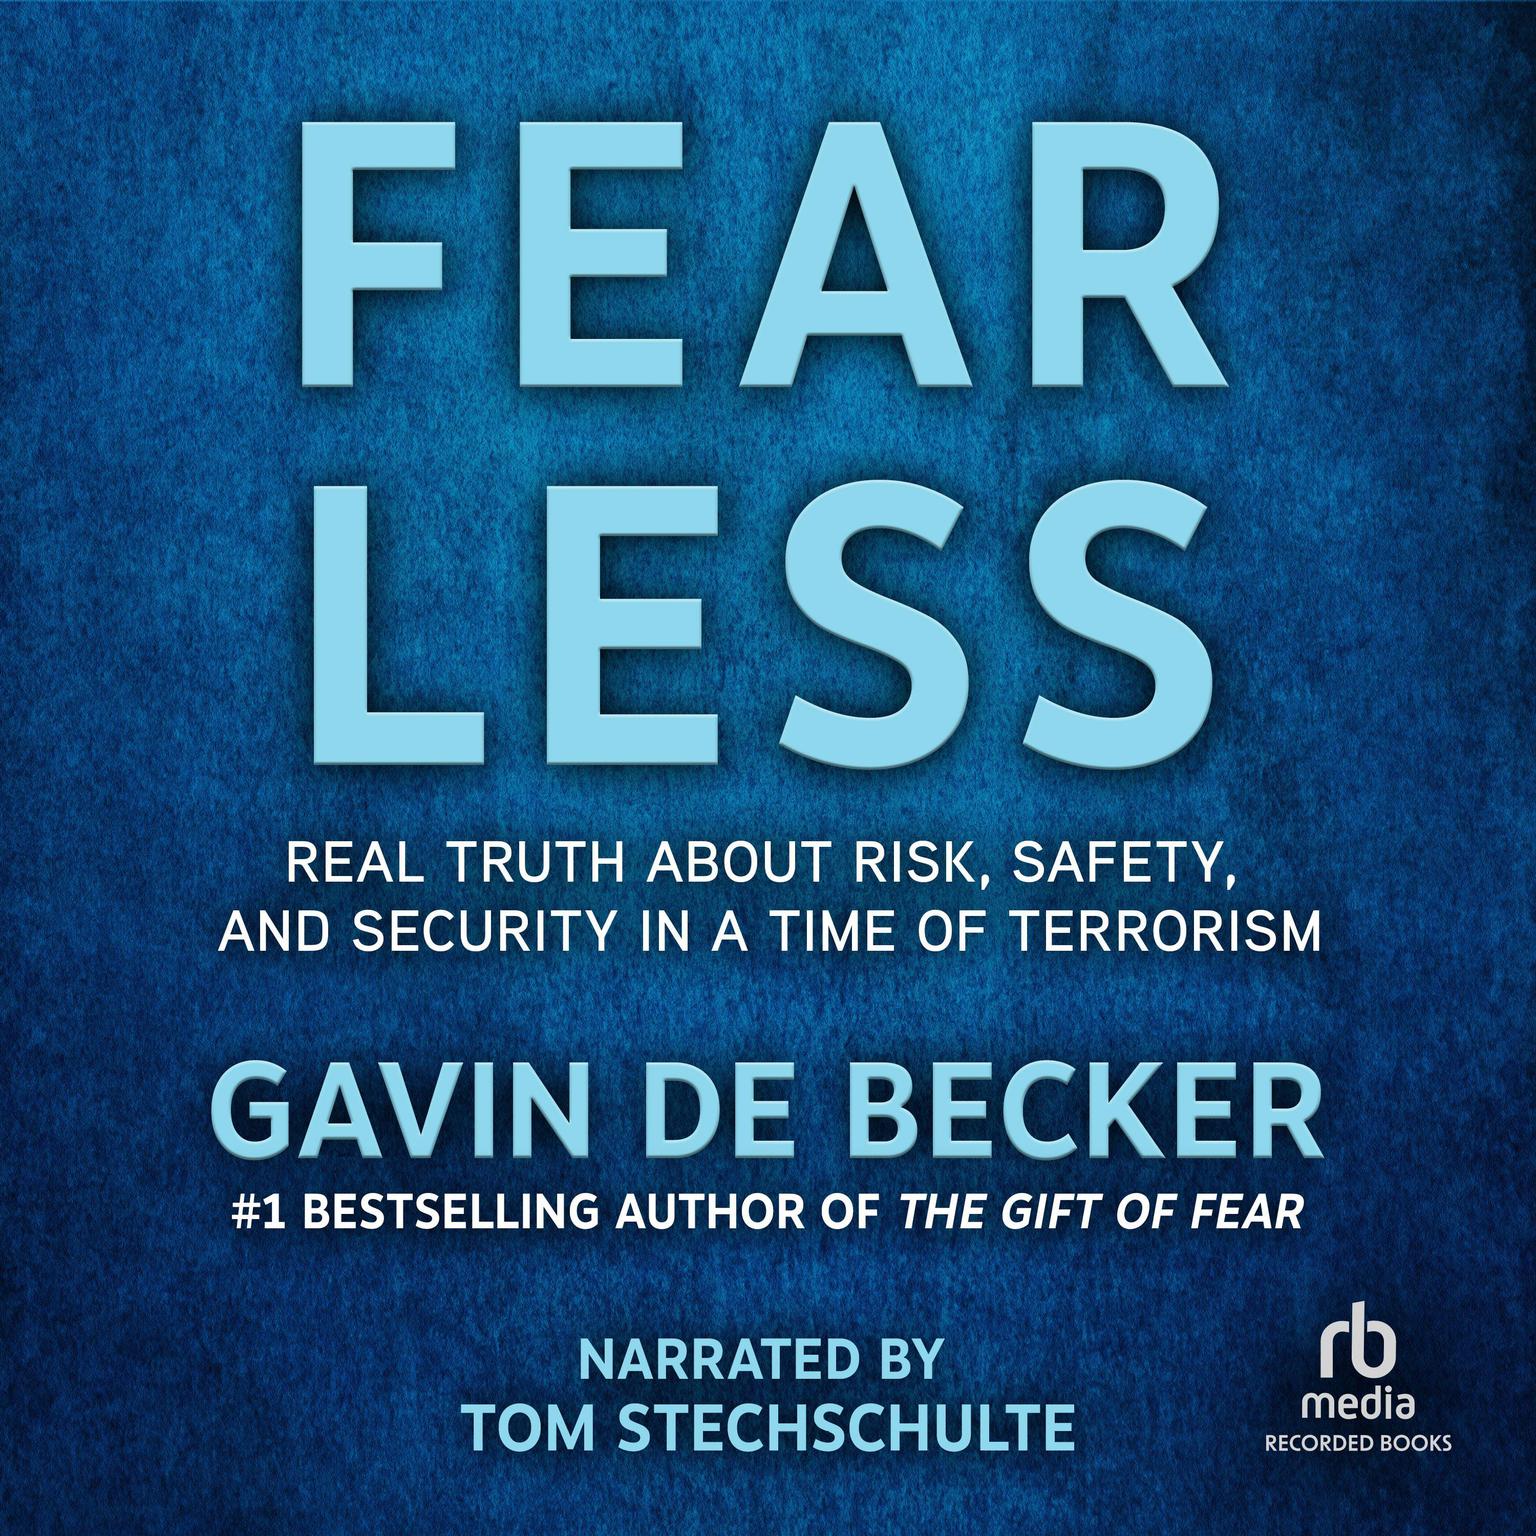 Fear Less: Real Truth About Risk, Safety, and Security in a Time of Terrorism Audiobook, by Gavin de Becker